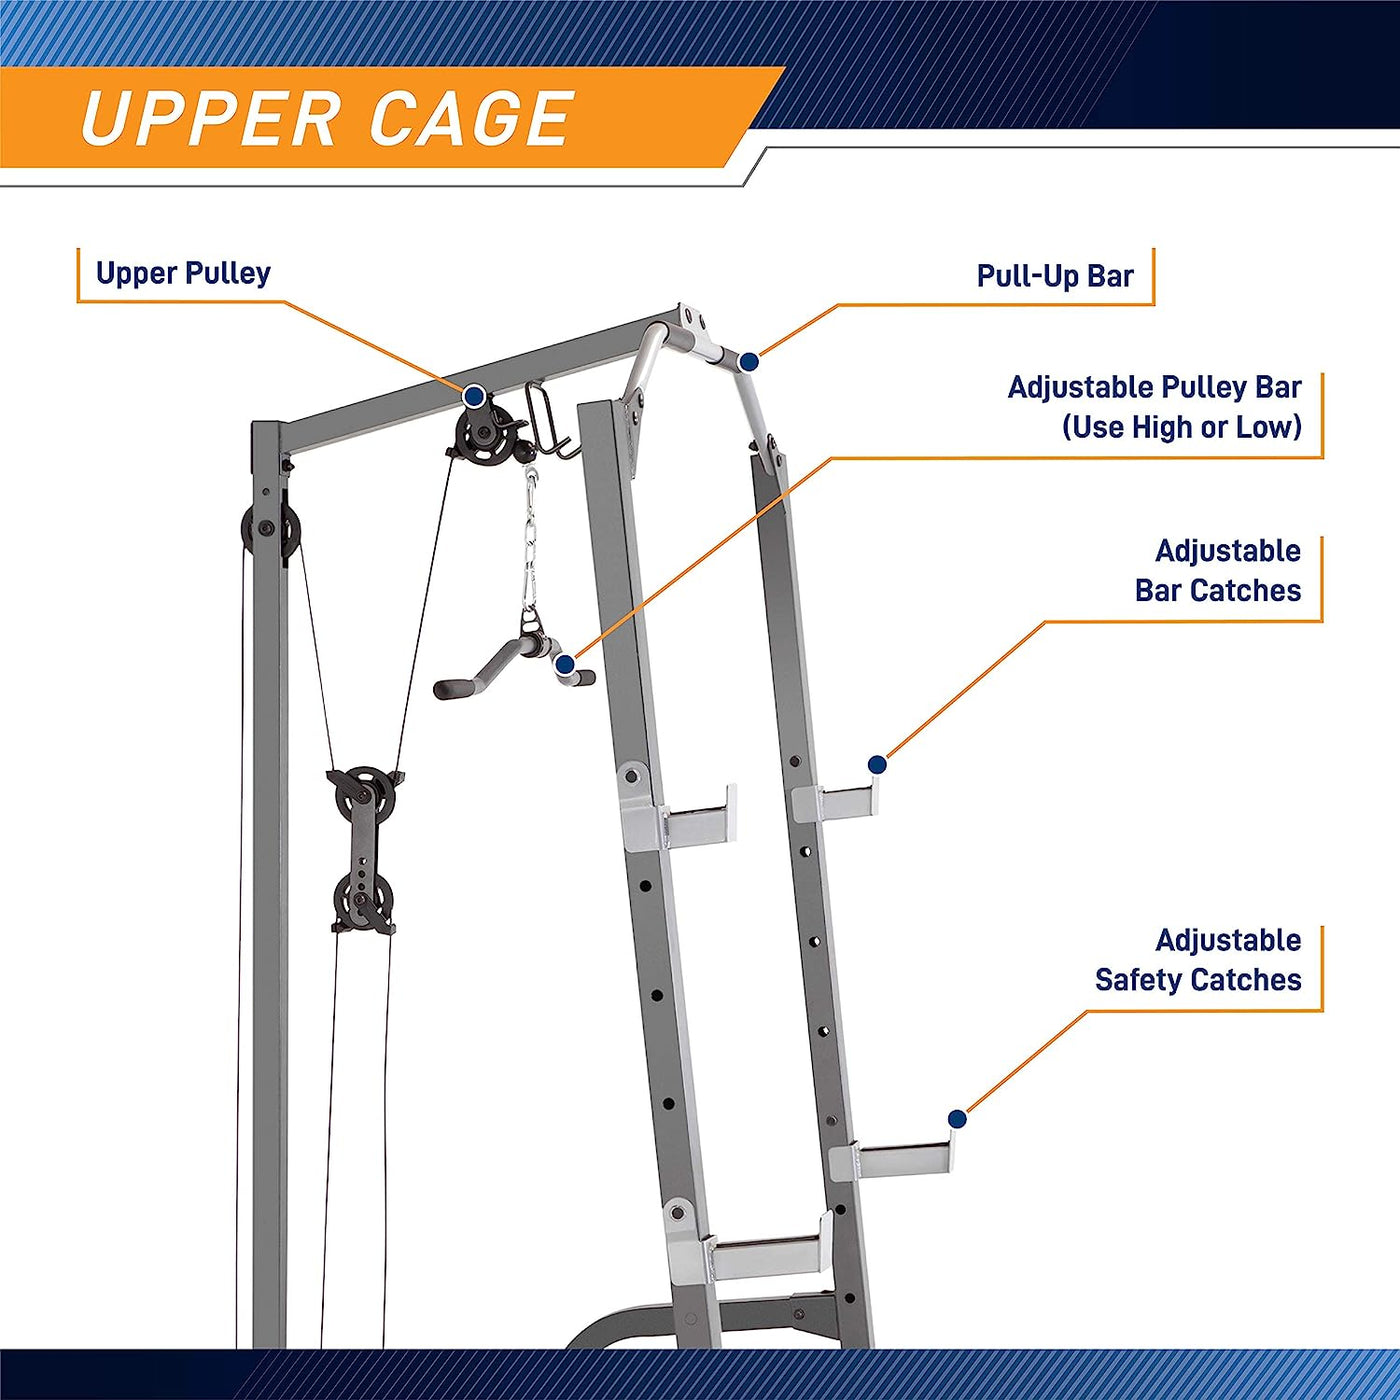 Marcy Pro Deluxe Cage System with Weightlifting Bench All-in-One Home Gym - $360